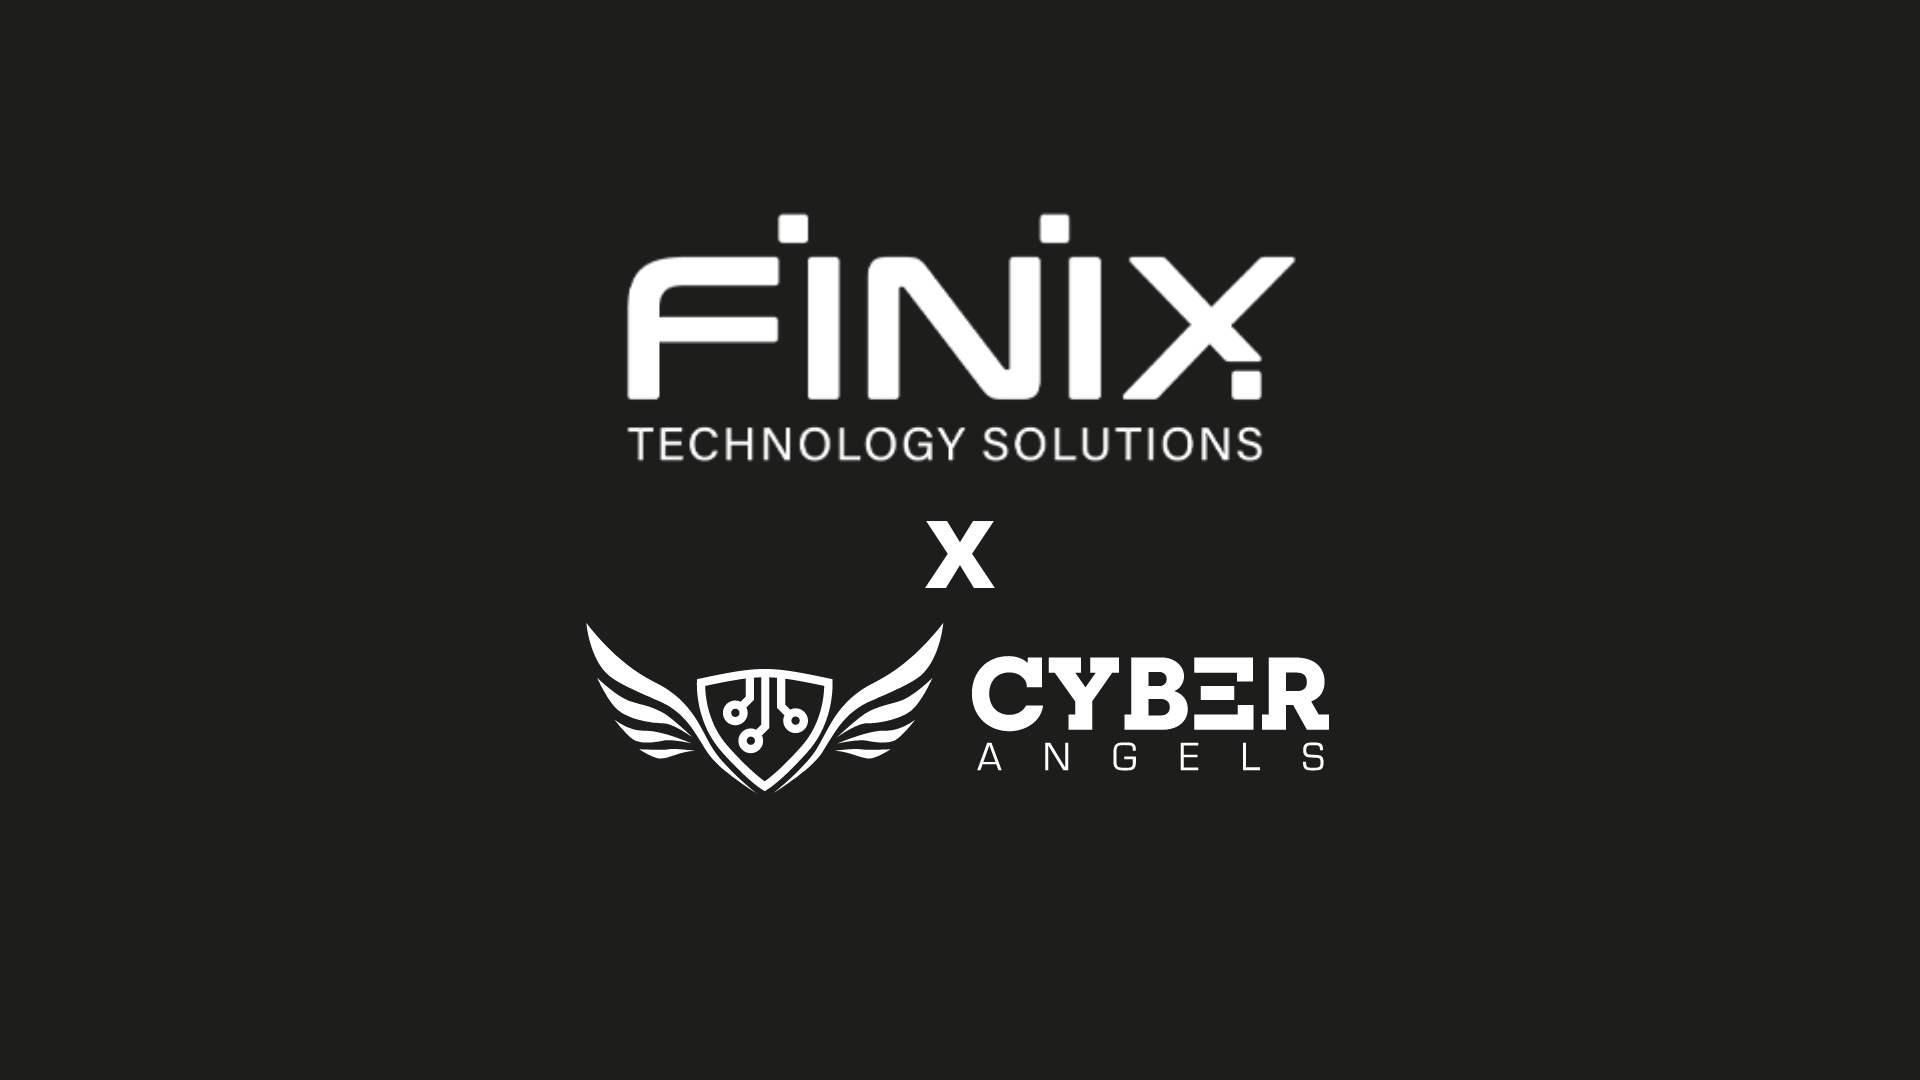 Finix Technology Solutions and Cyberangels join forces for customer cybersecurity